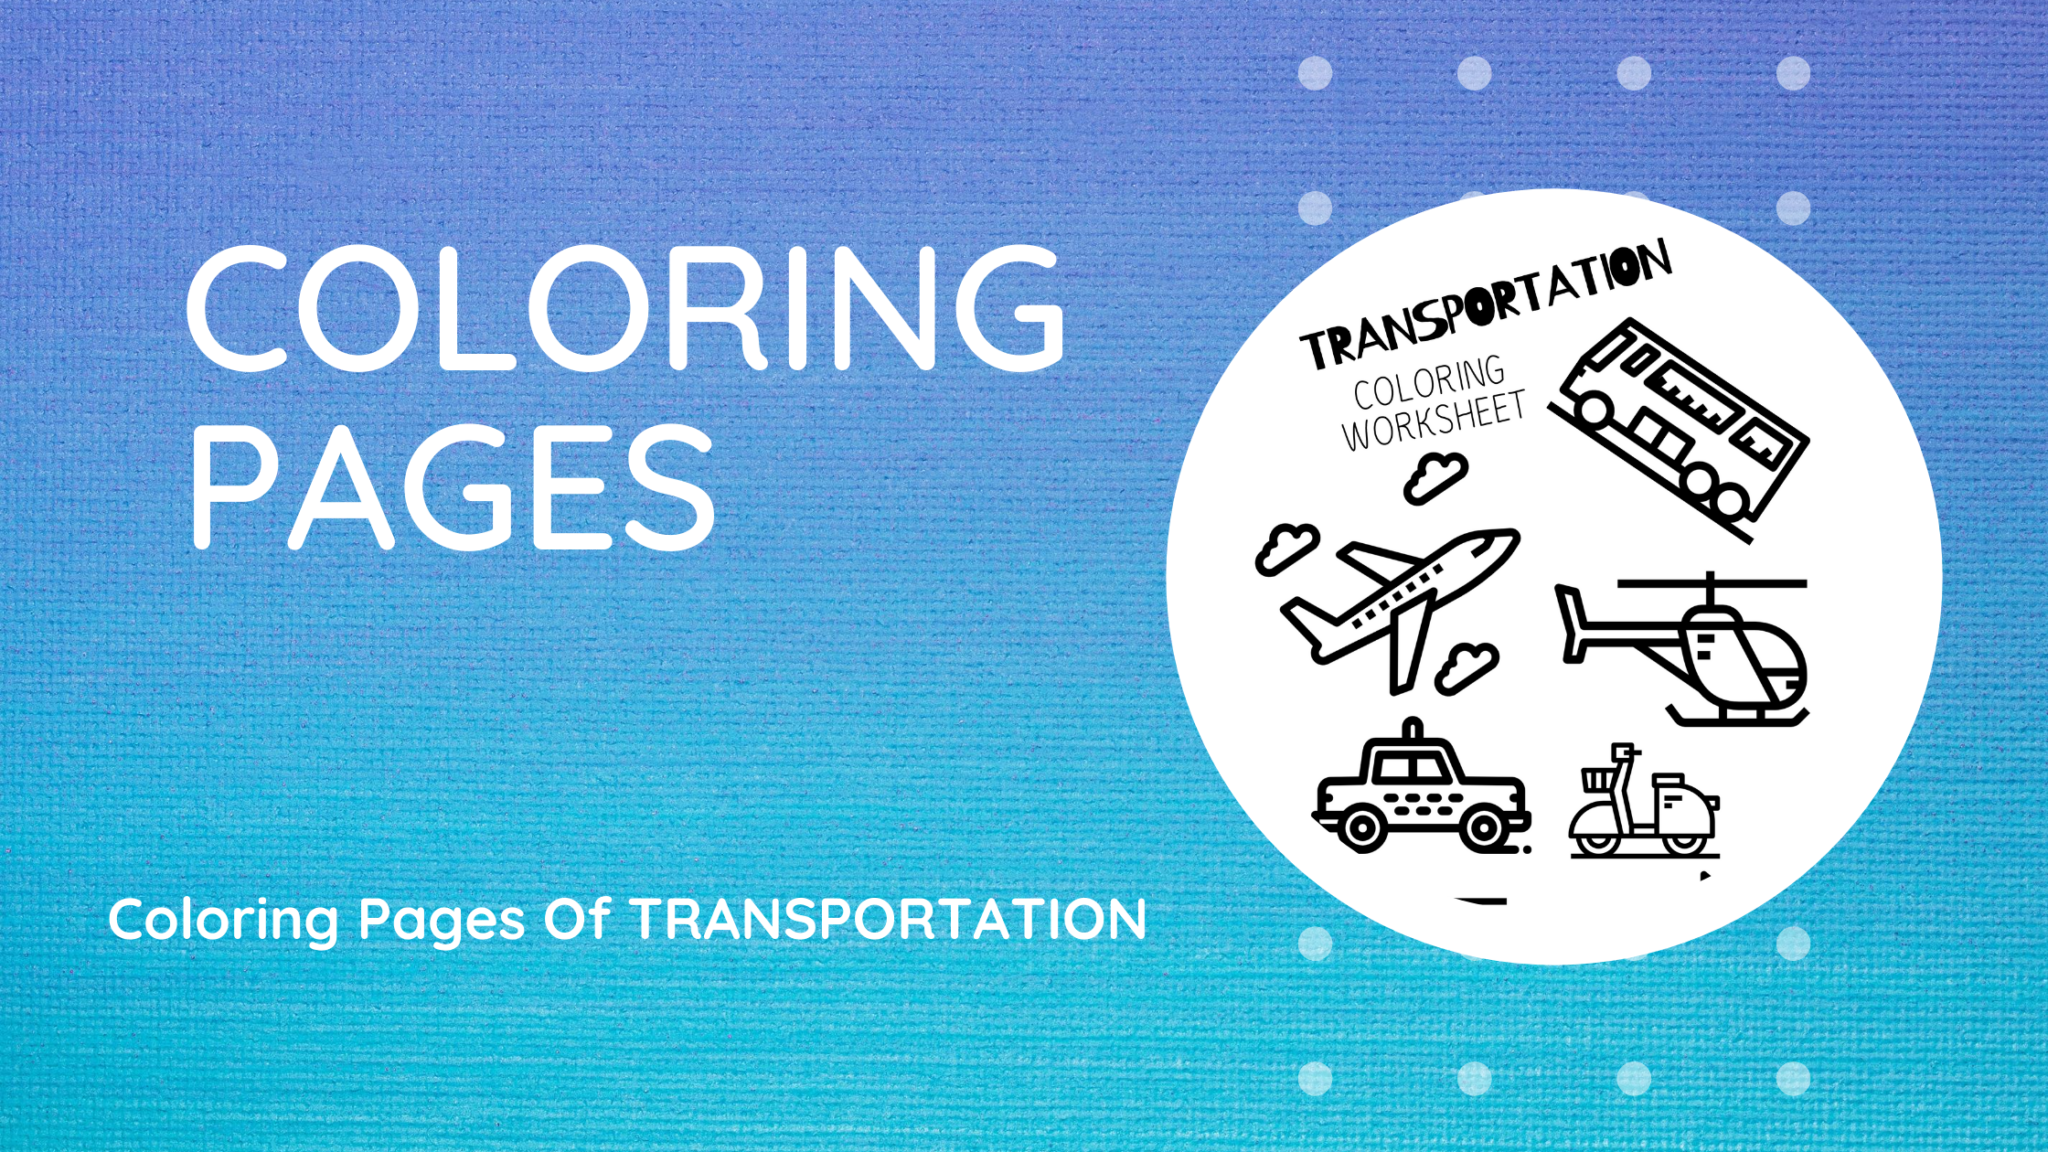 Coloring Pages of Transportation